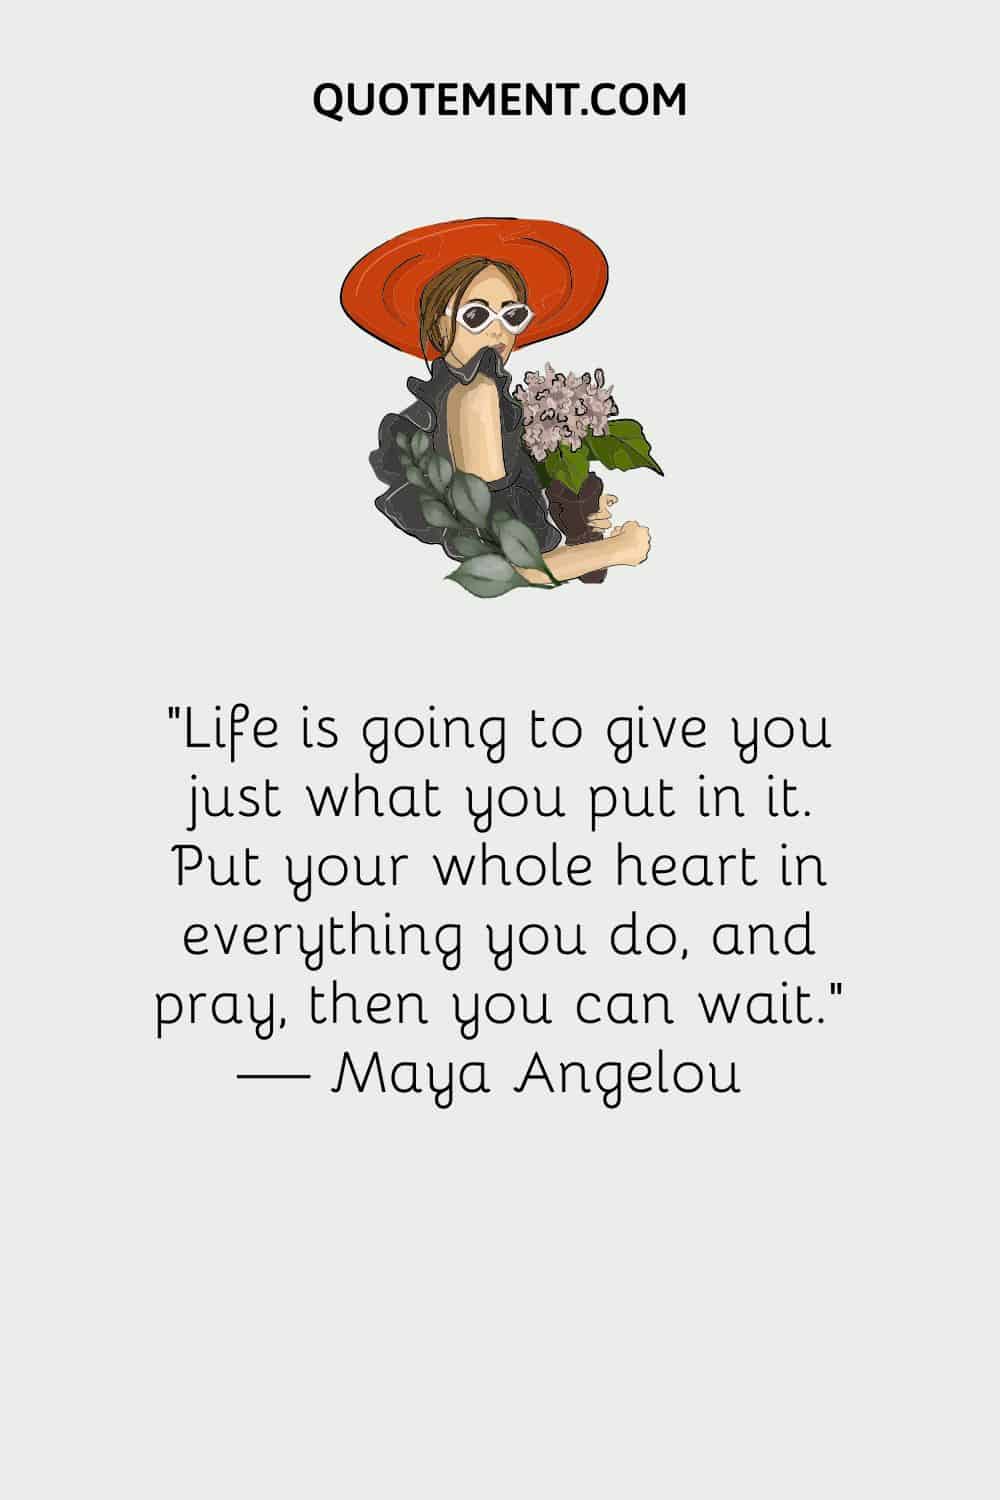 Life is going to give you just what you put in it. Put your whole heart in everything you do, and pray, then you can wait